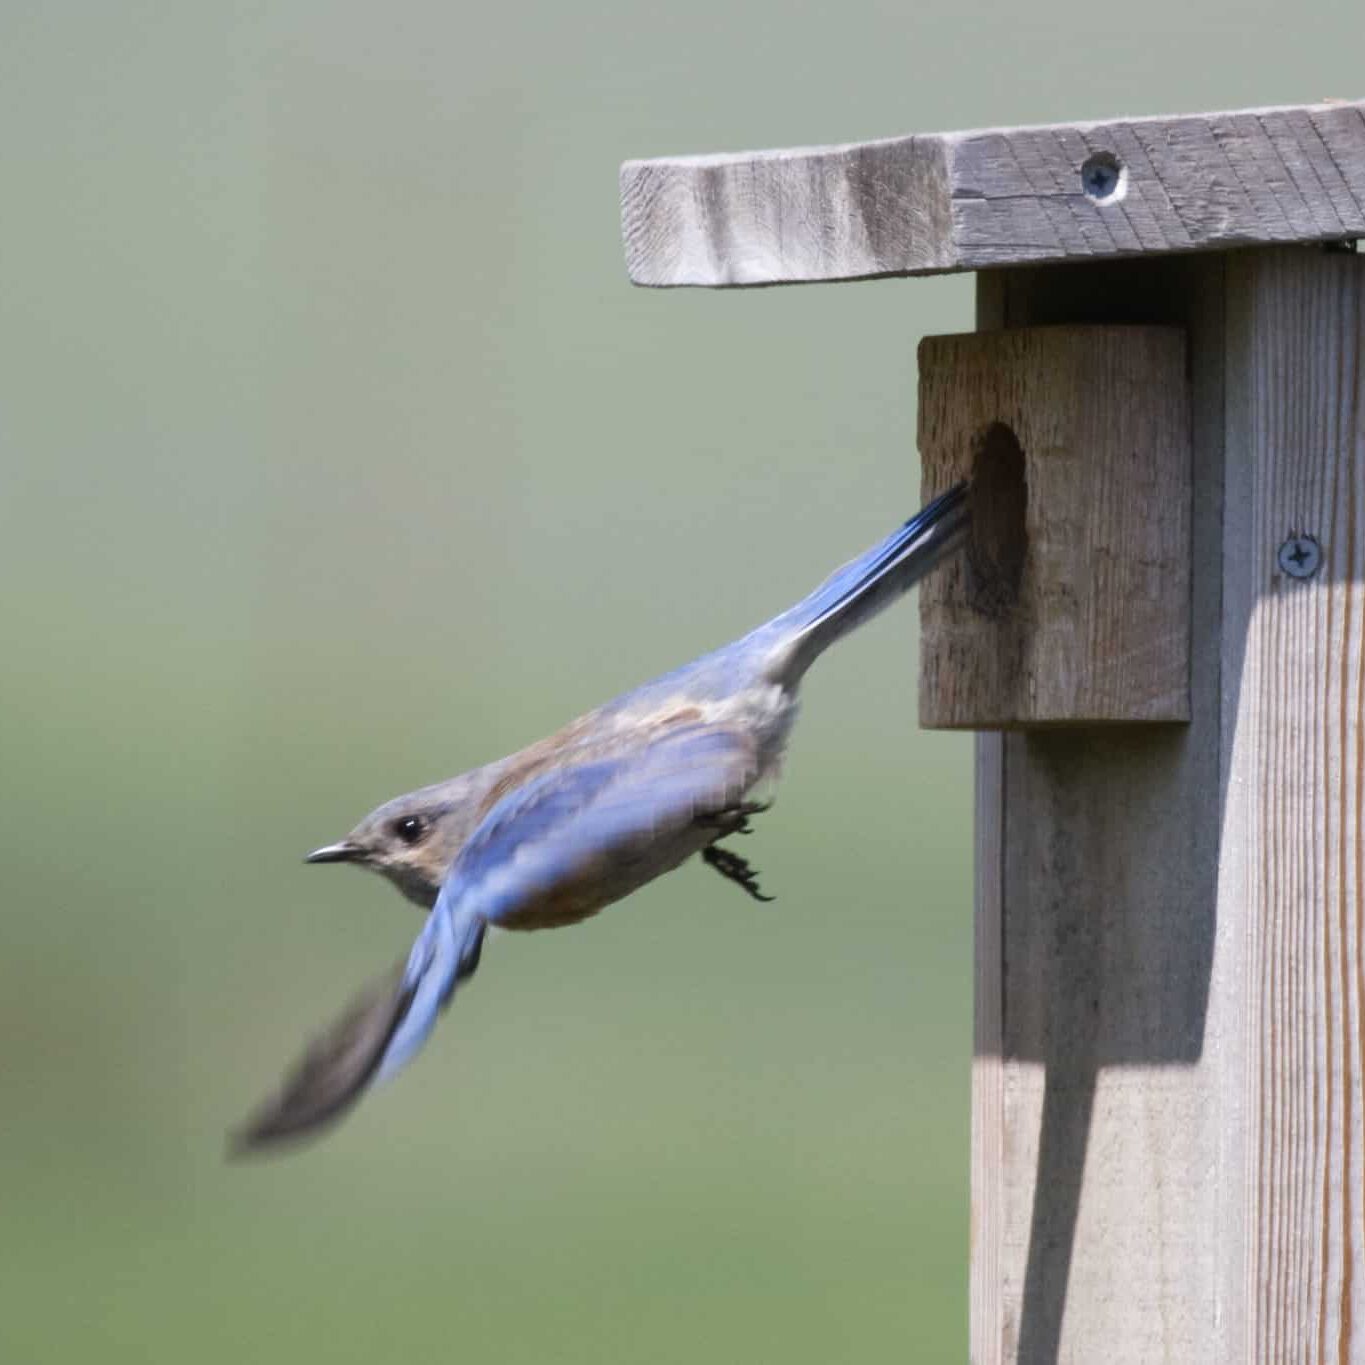 One of a pair of Western Bluebird's taking care of their nest.